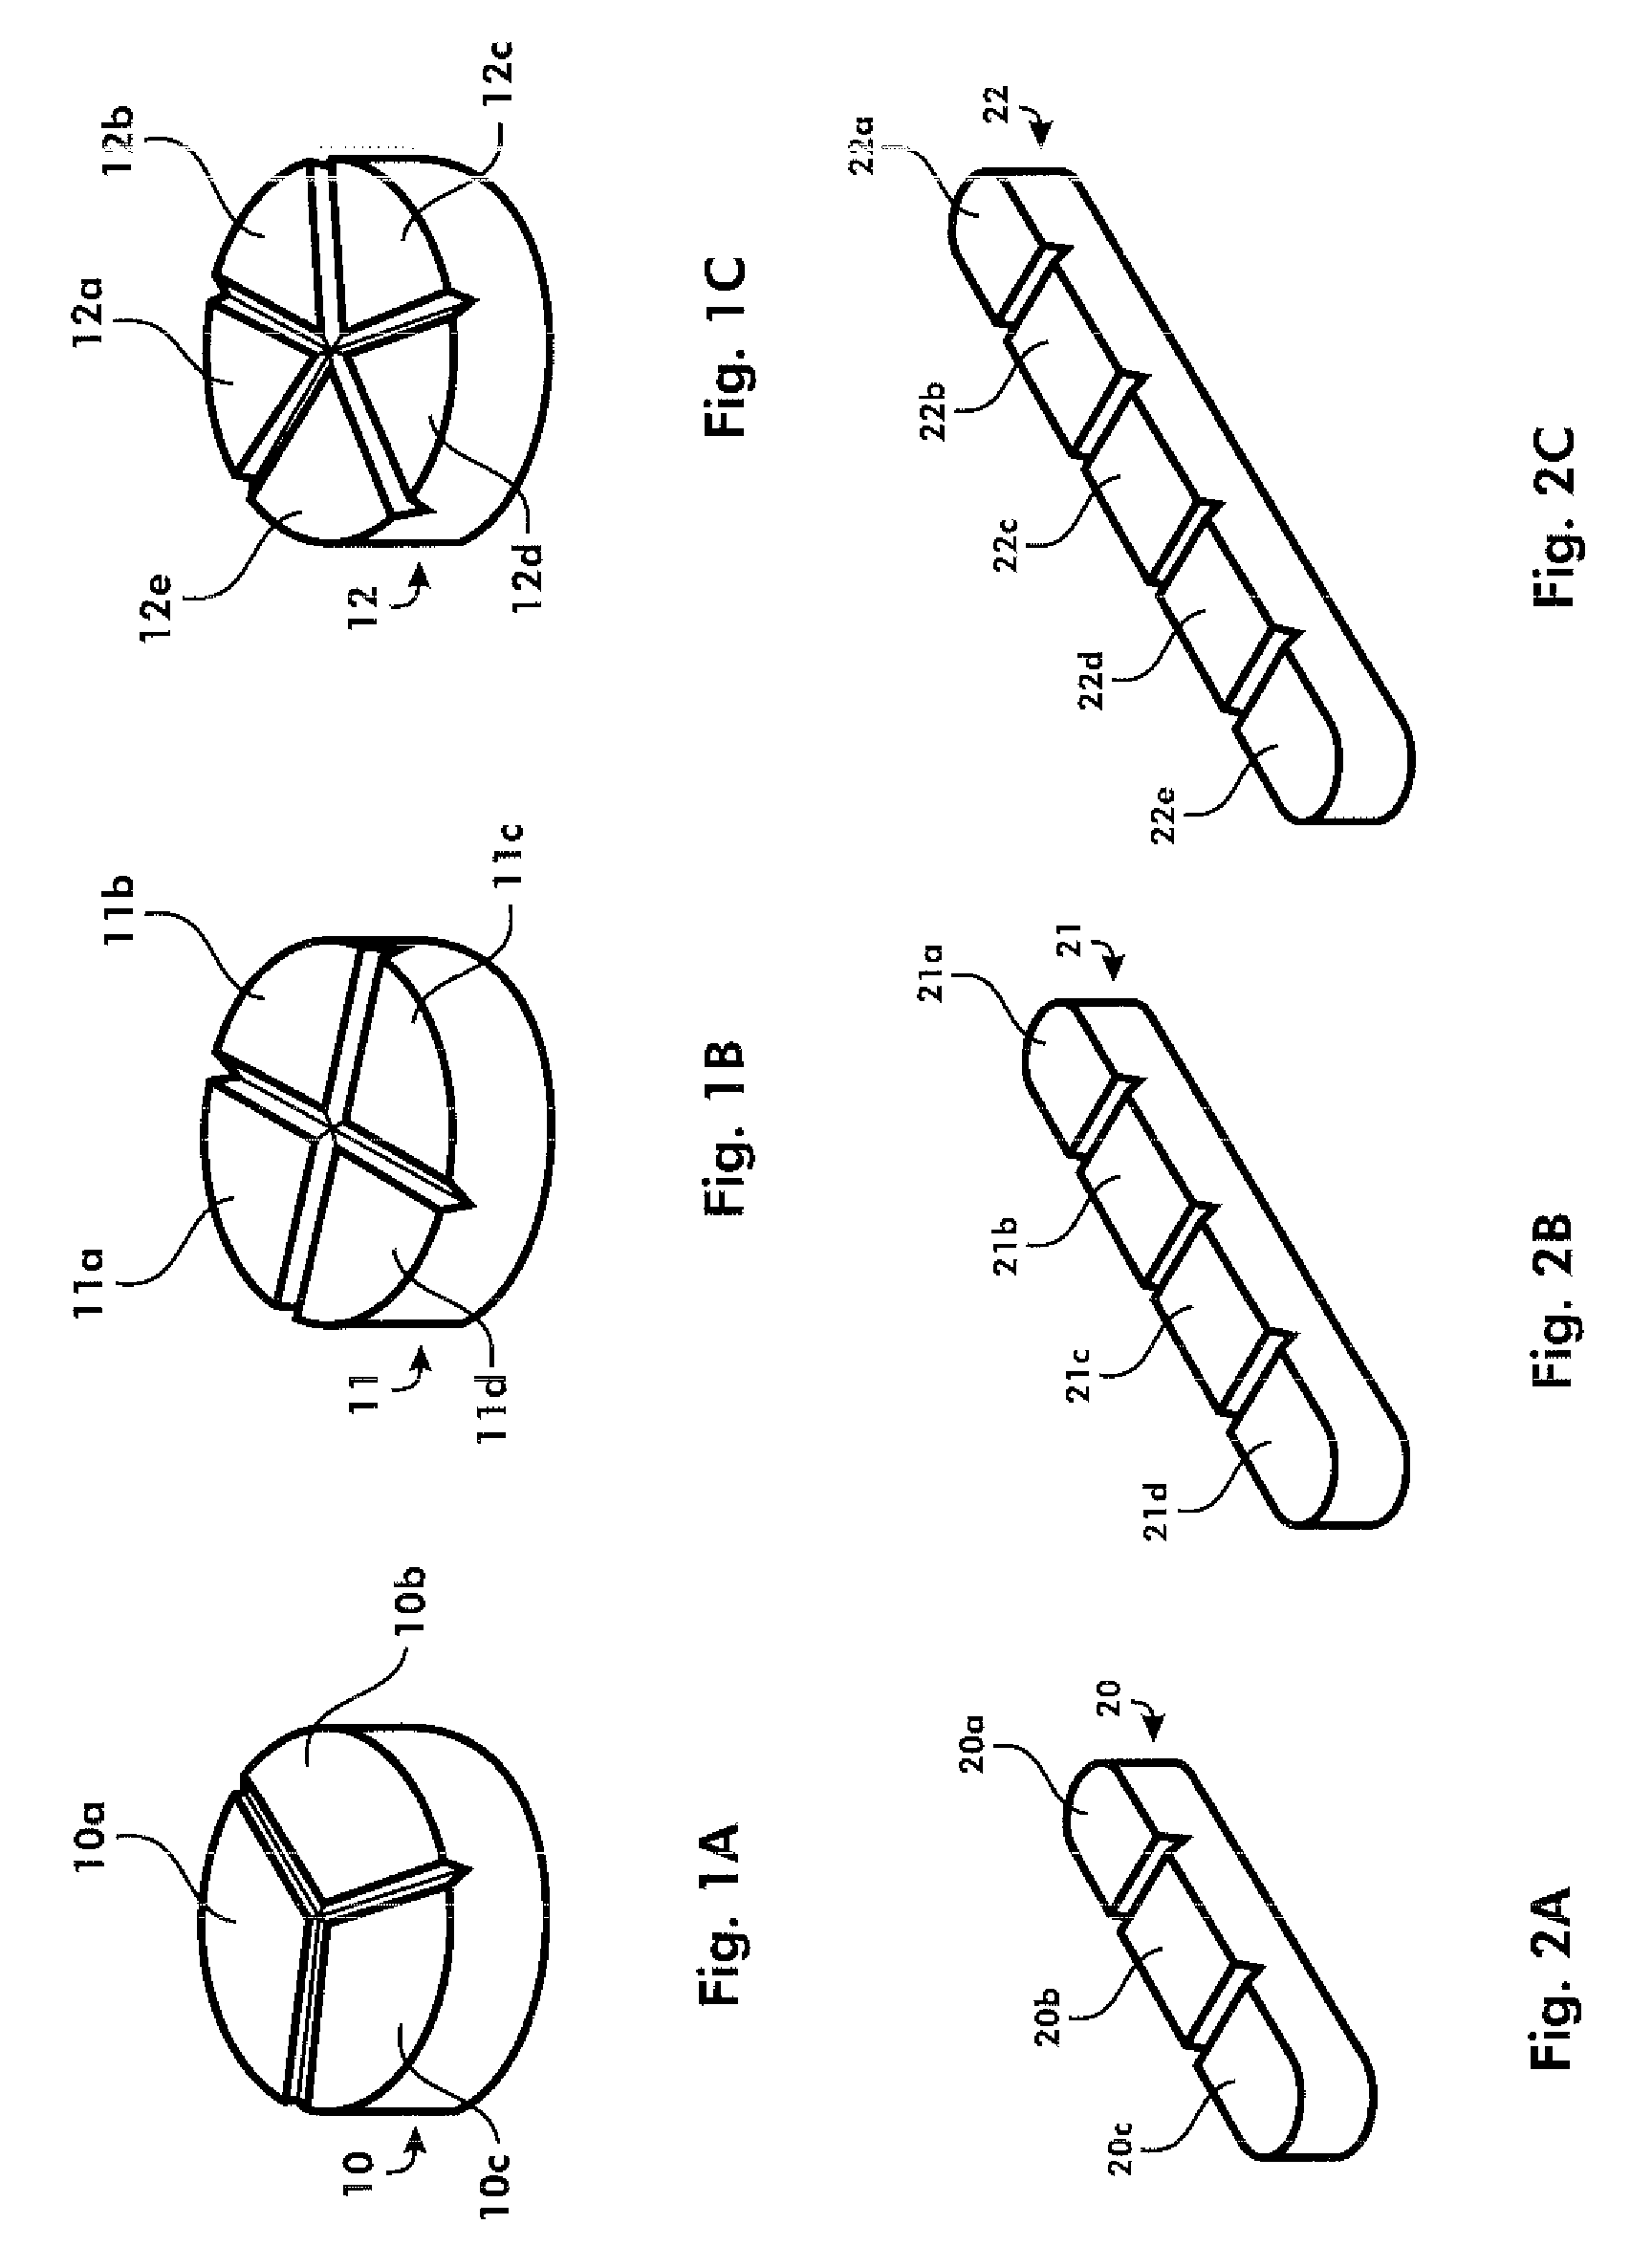 Pharmaceutical compositions having novel scoring patterns and methods of using those compositions